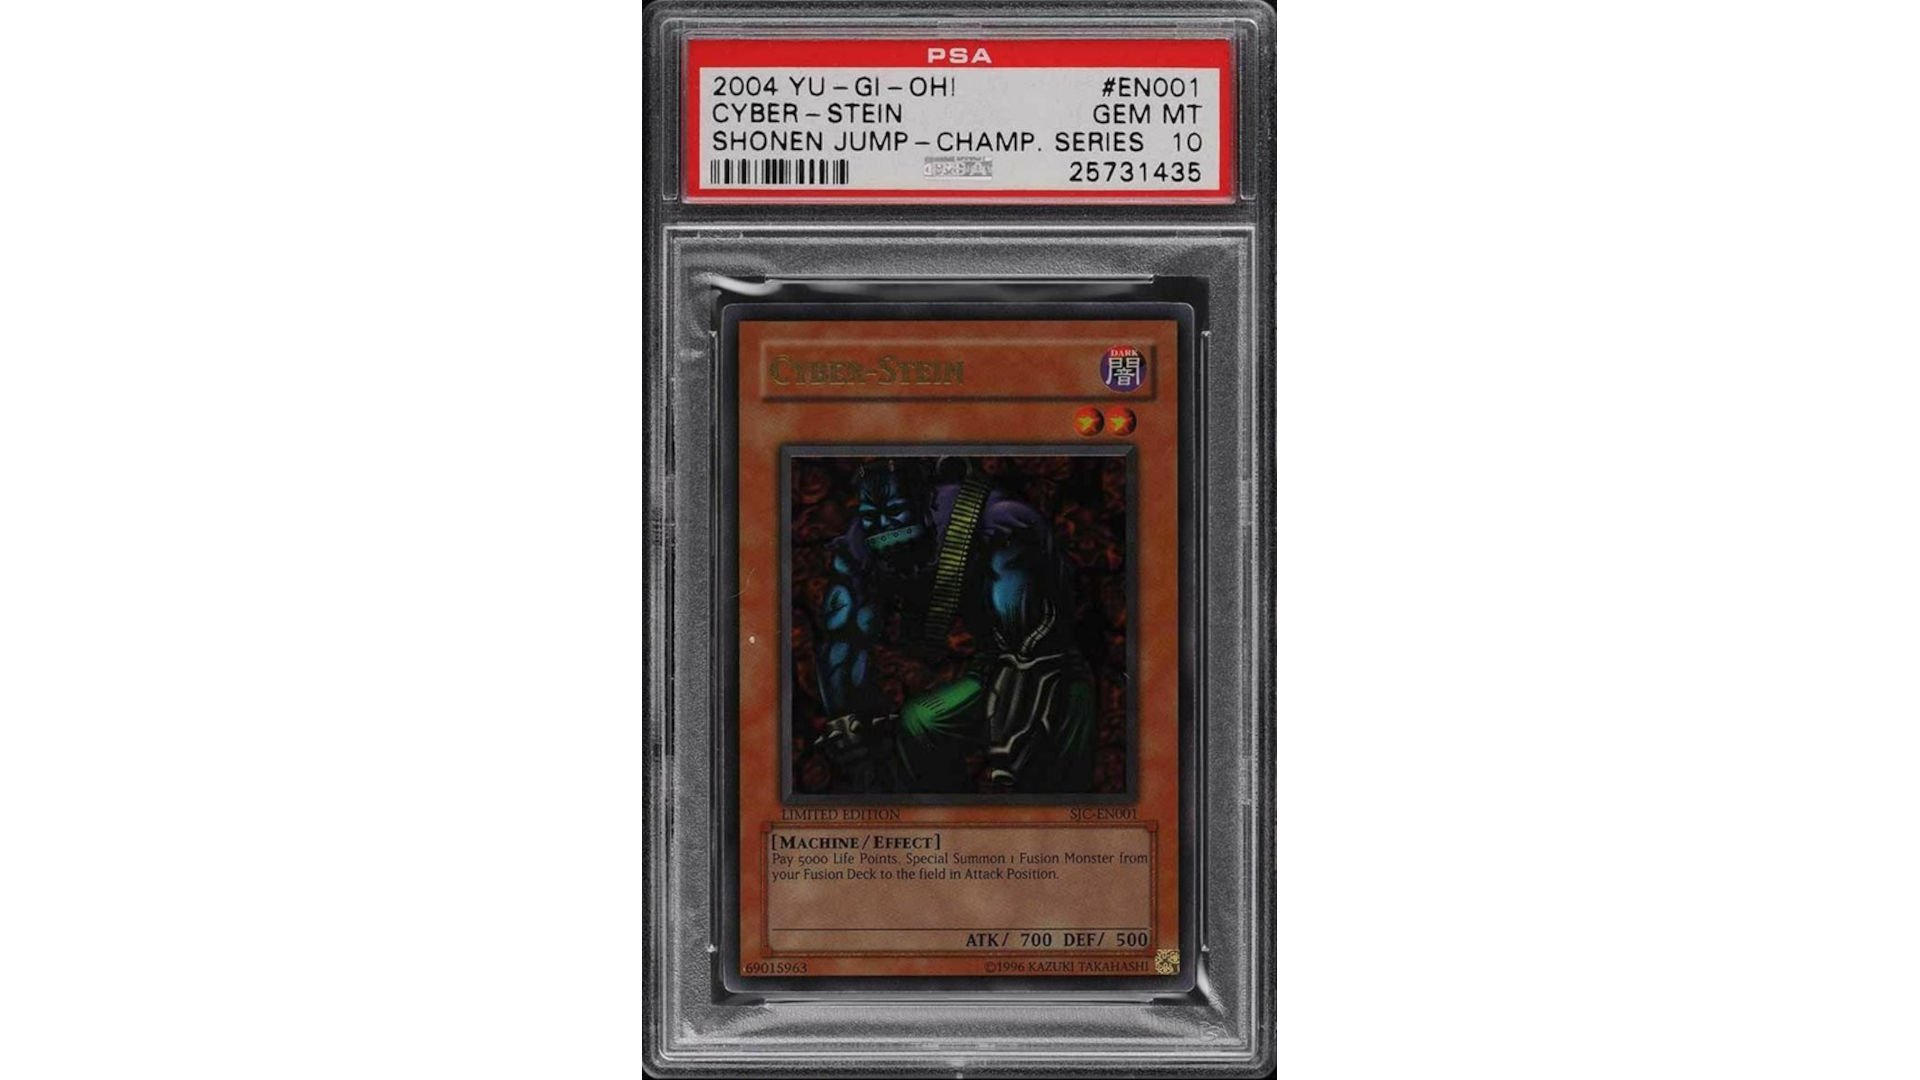 Most expensive Yugioh cards - photo of Cyber-Stein, a rare YuGiOh card, in a protective case